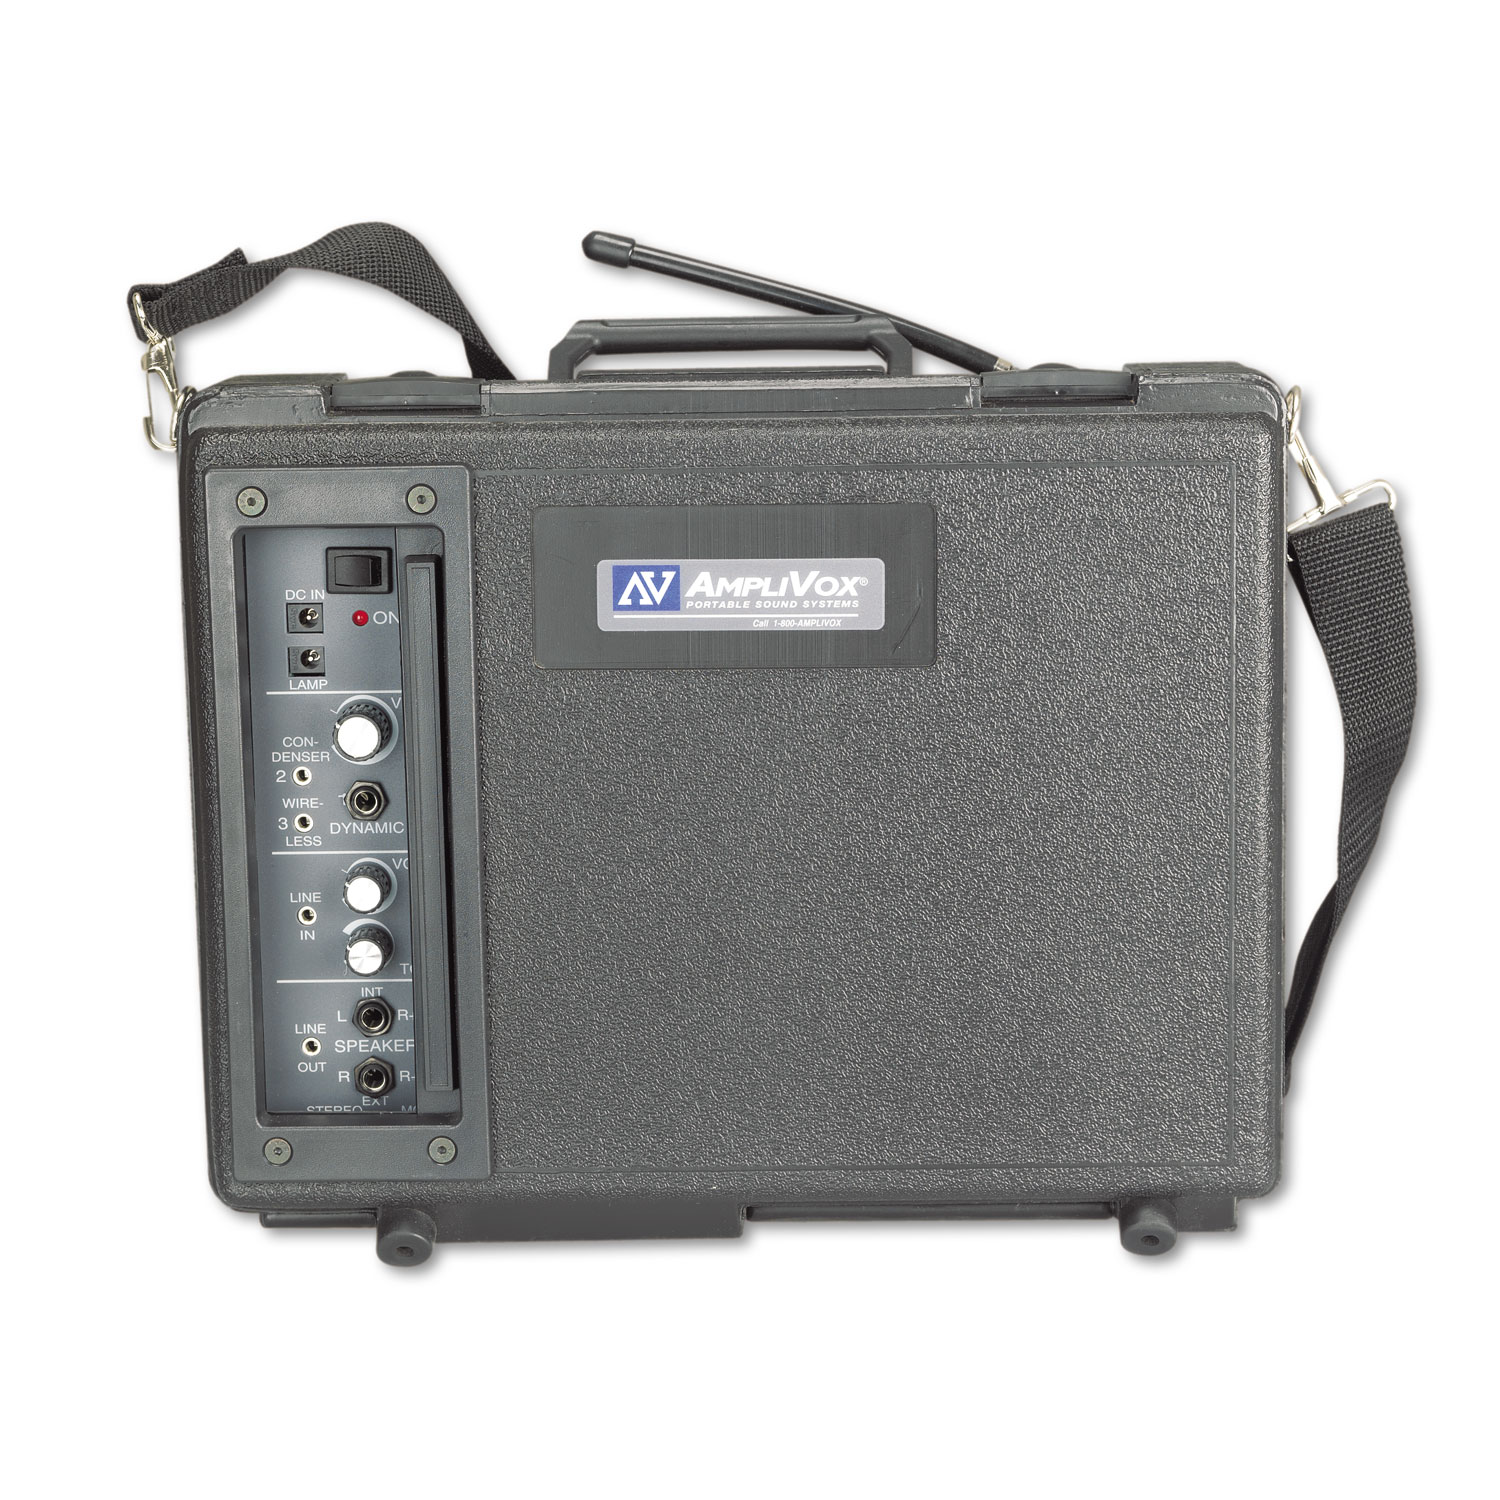 Wireless Audio Portable Buddy Professional Group Broadcast PA System